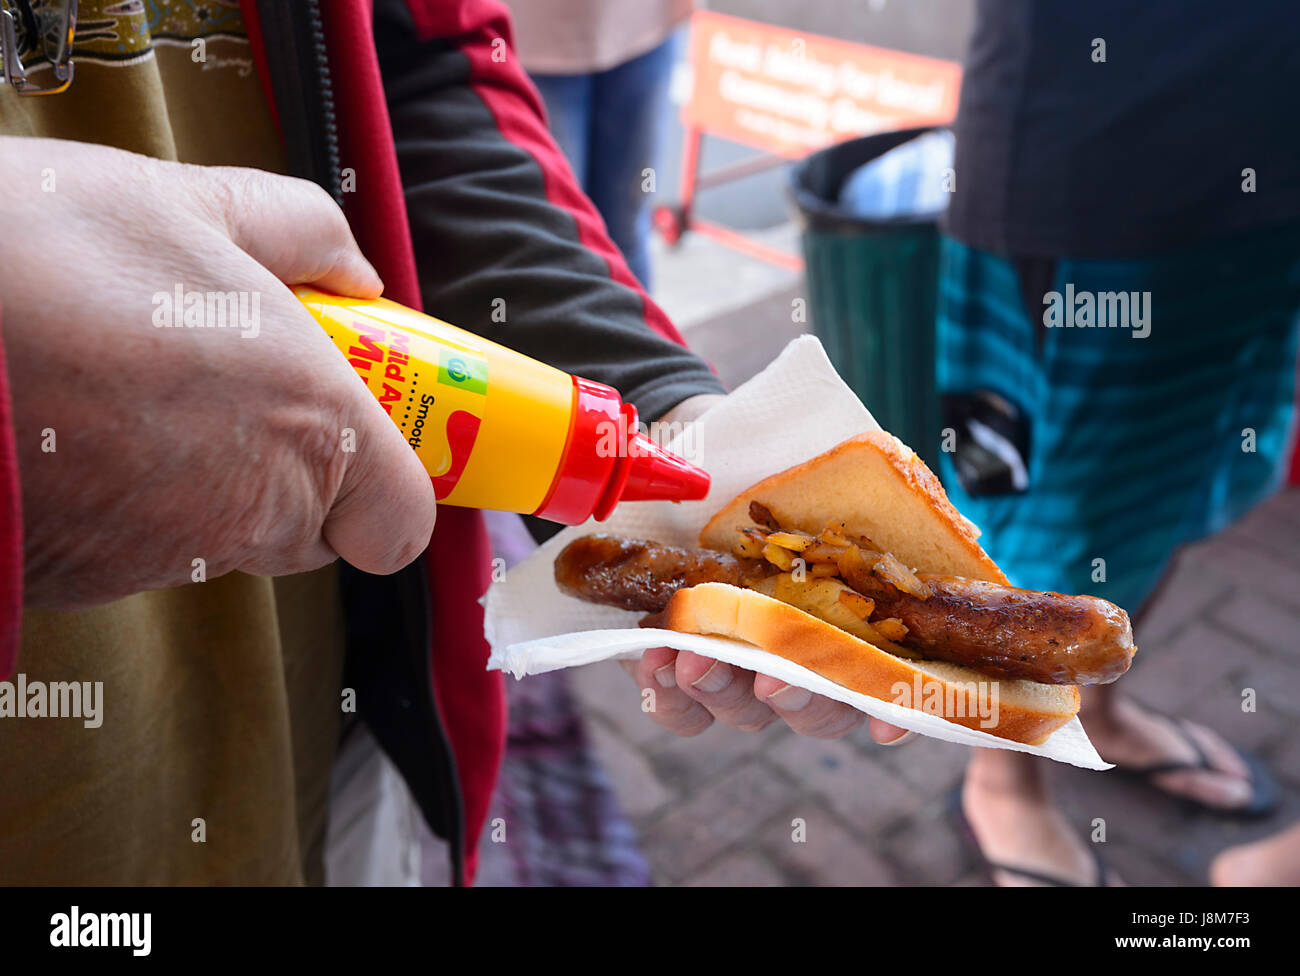 Person pouring mustard on a Bunnings Warehouse Sausage Sizzle done for Fund Raising, New South Wales, NSW, Australia Stock Photo